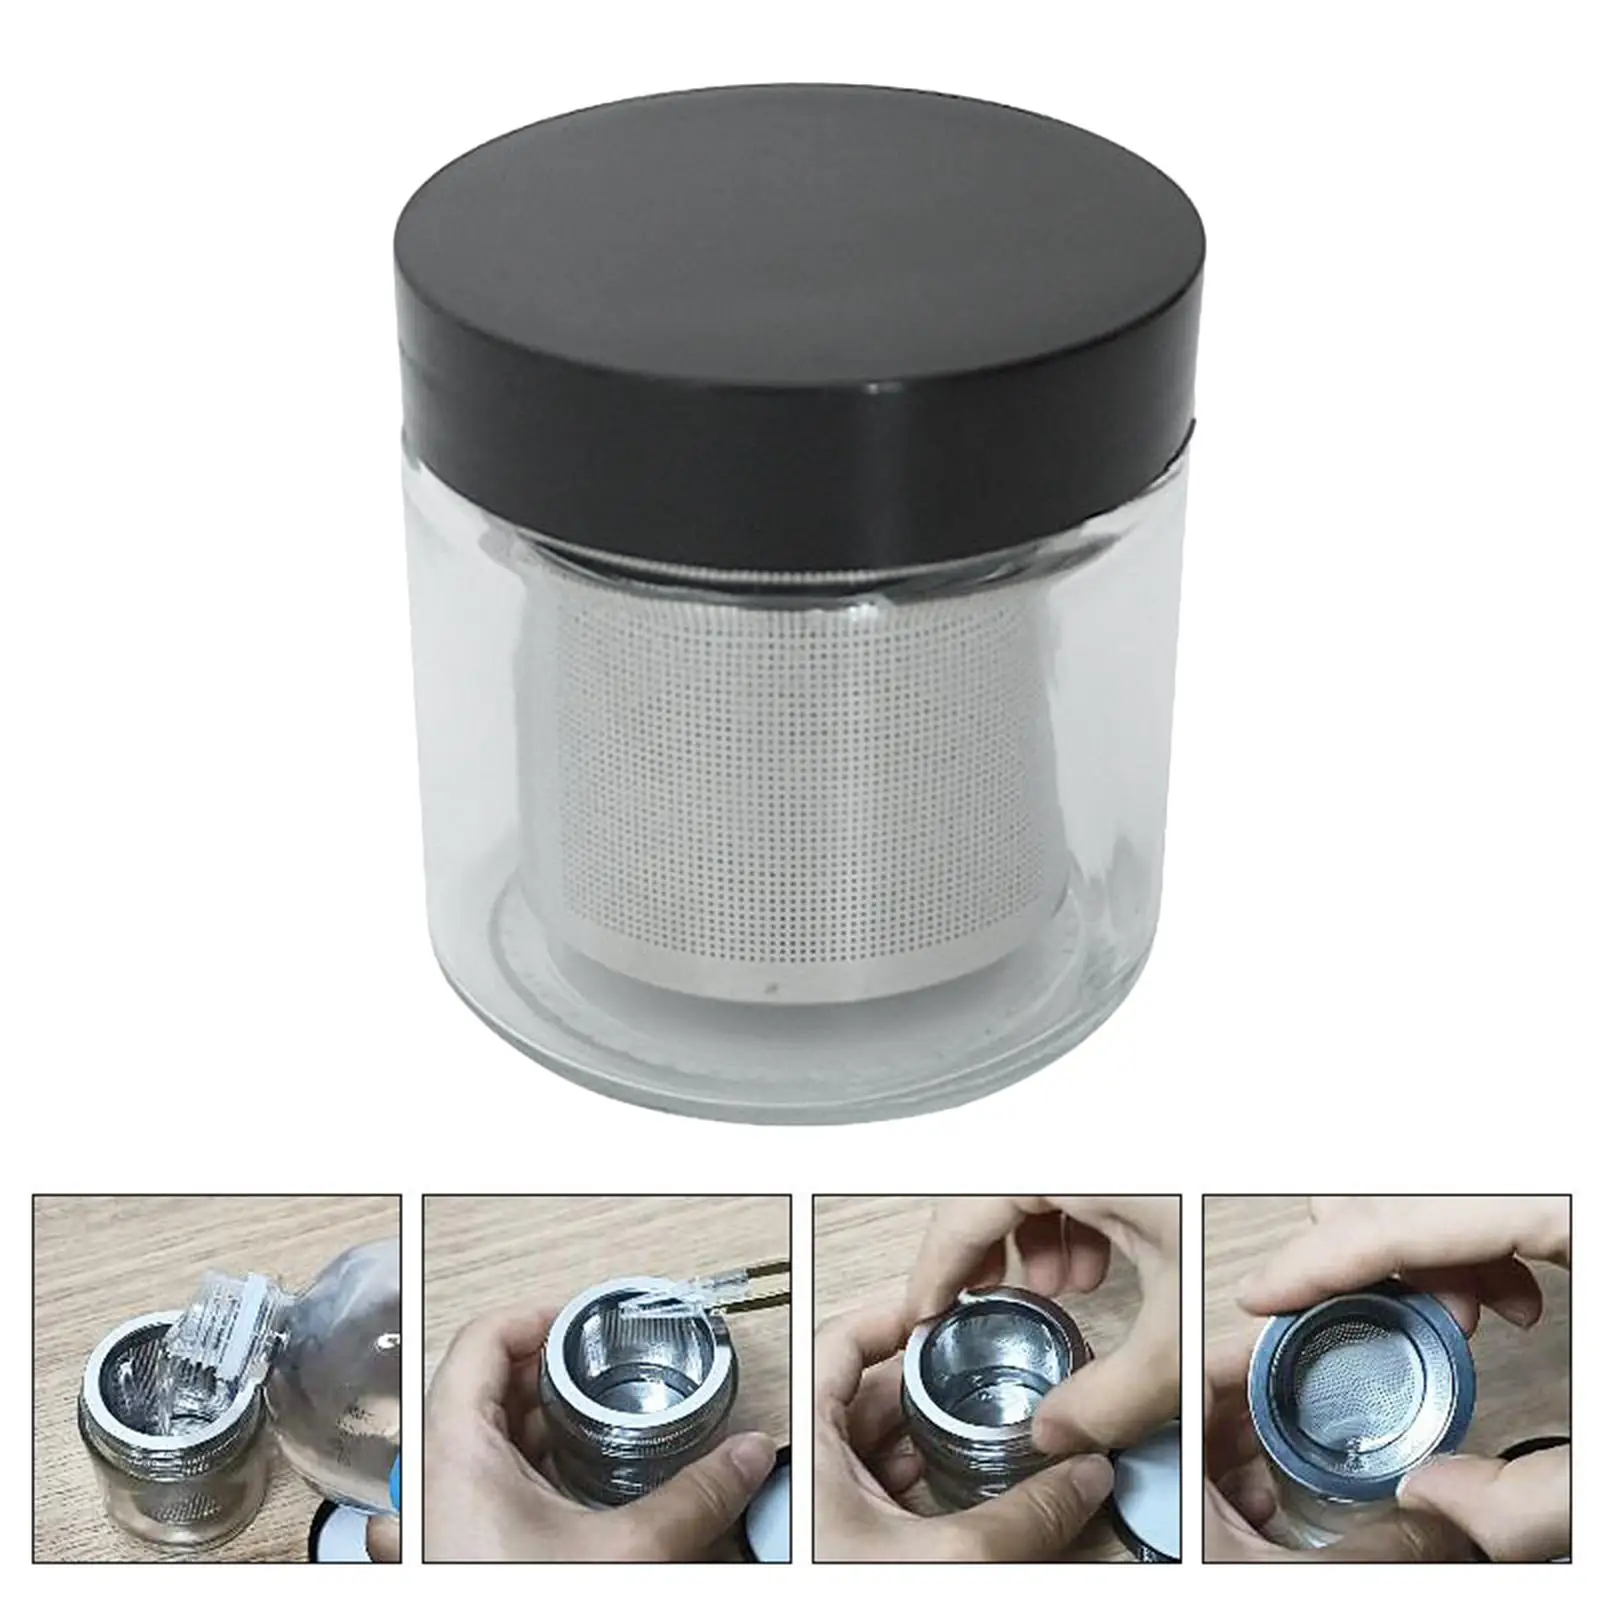 Diamond Washing Cup Cleaning Jar Washer Watchmaker Watch Parts Cleaner